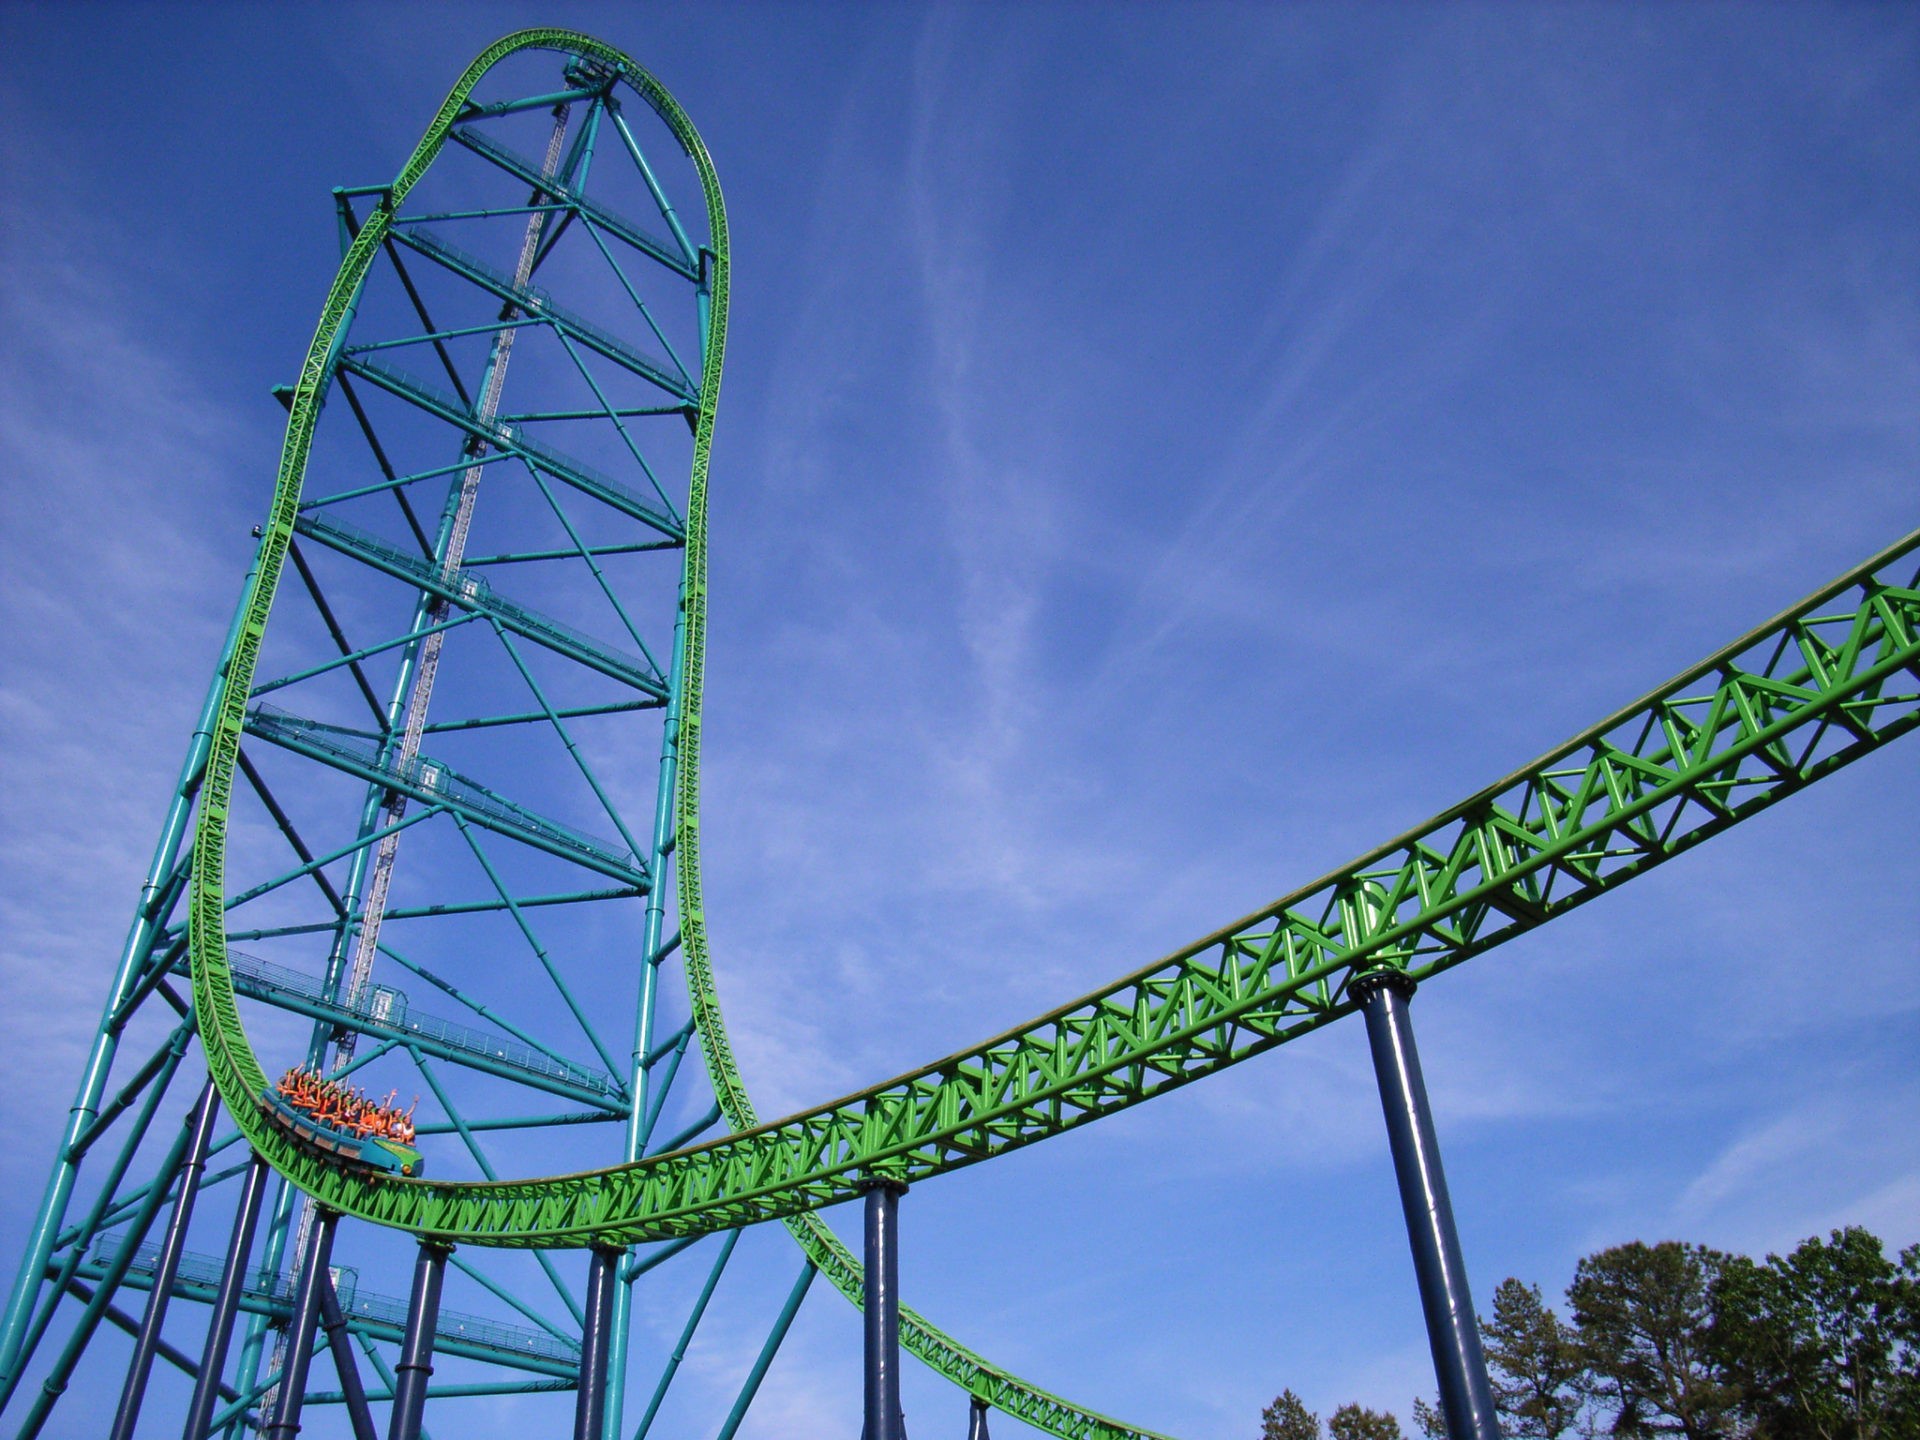 Kingda Ka Is the Tallest Rollercoaster in the World Hits 128 MPH in 3.